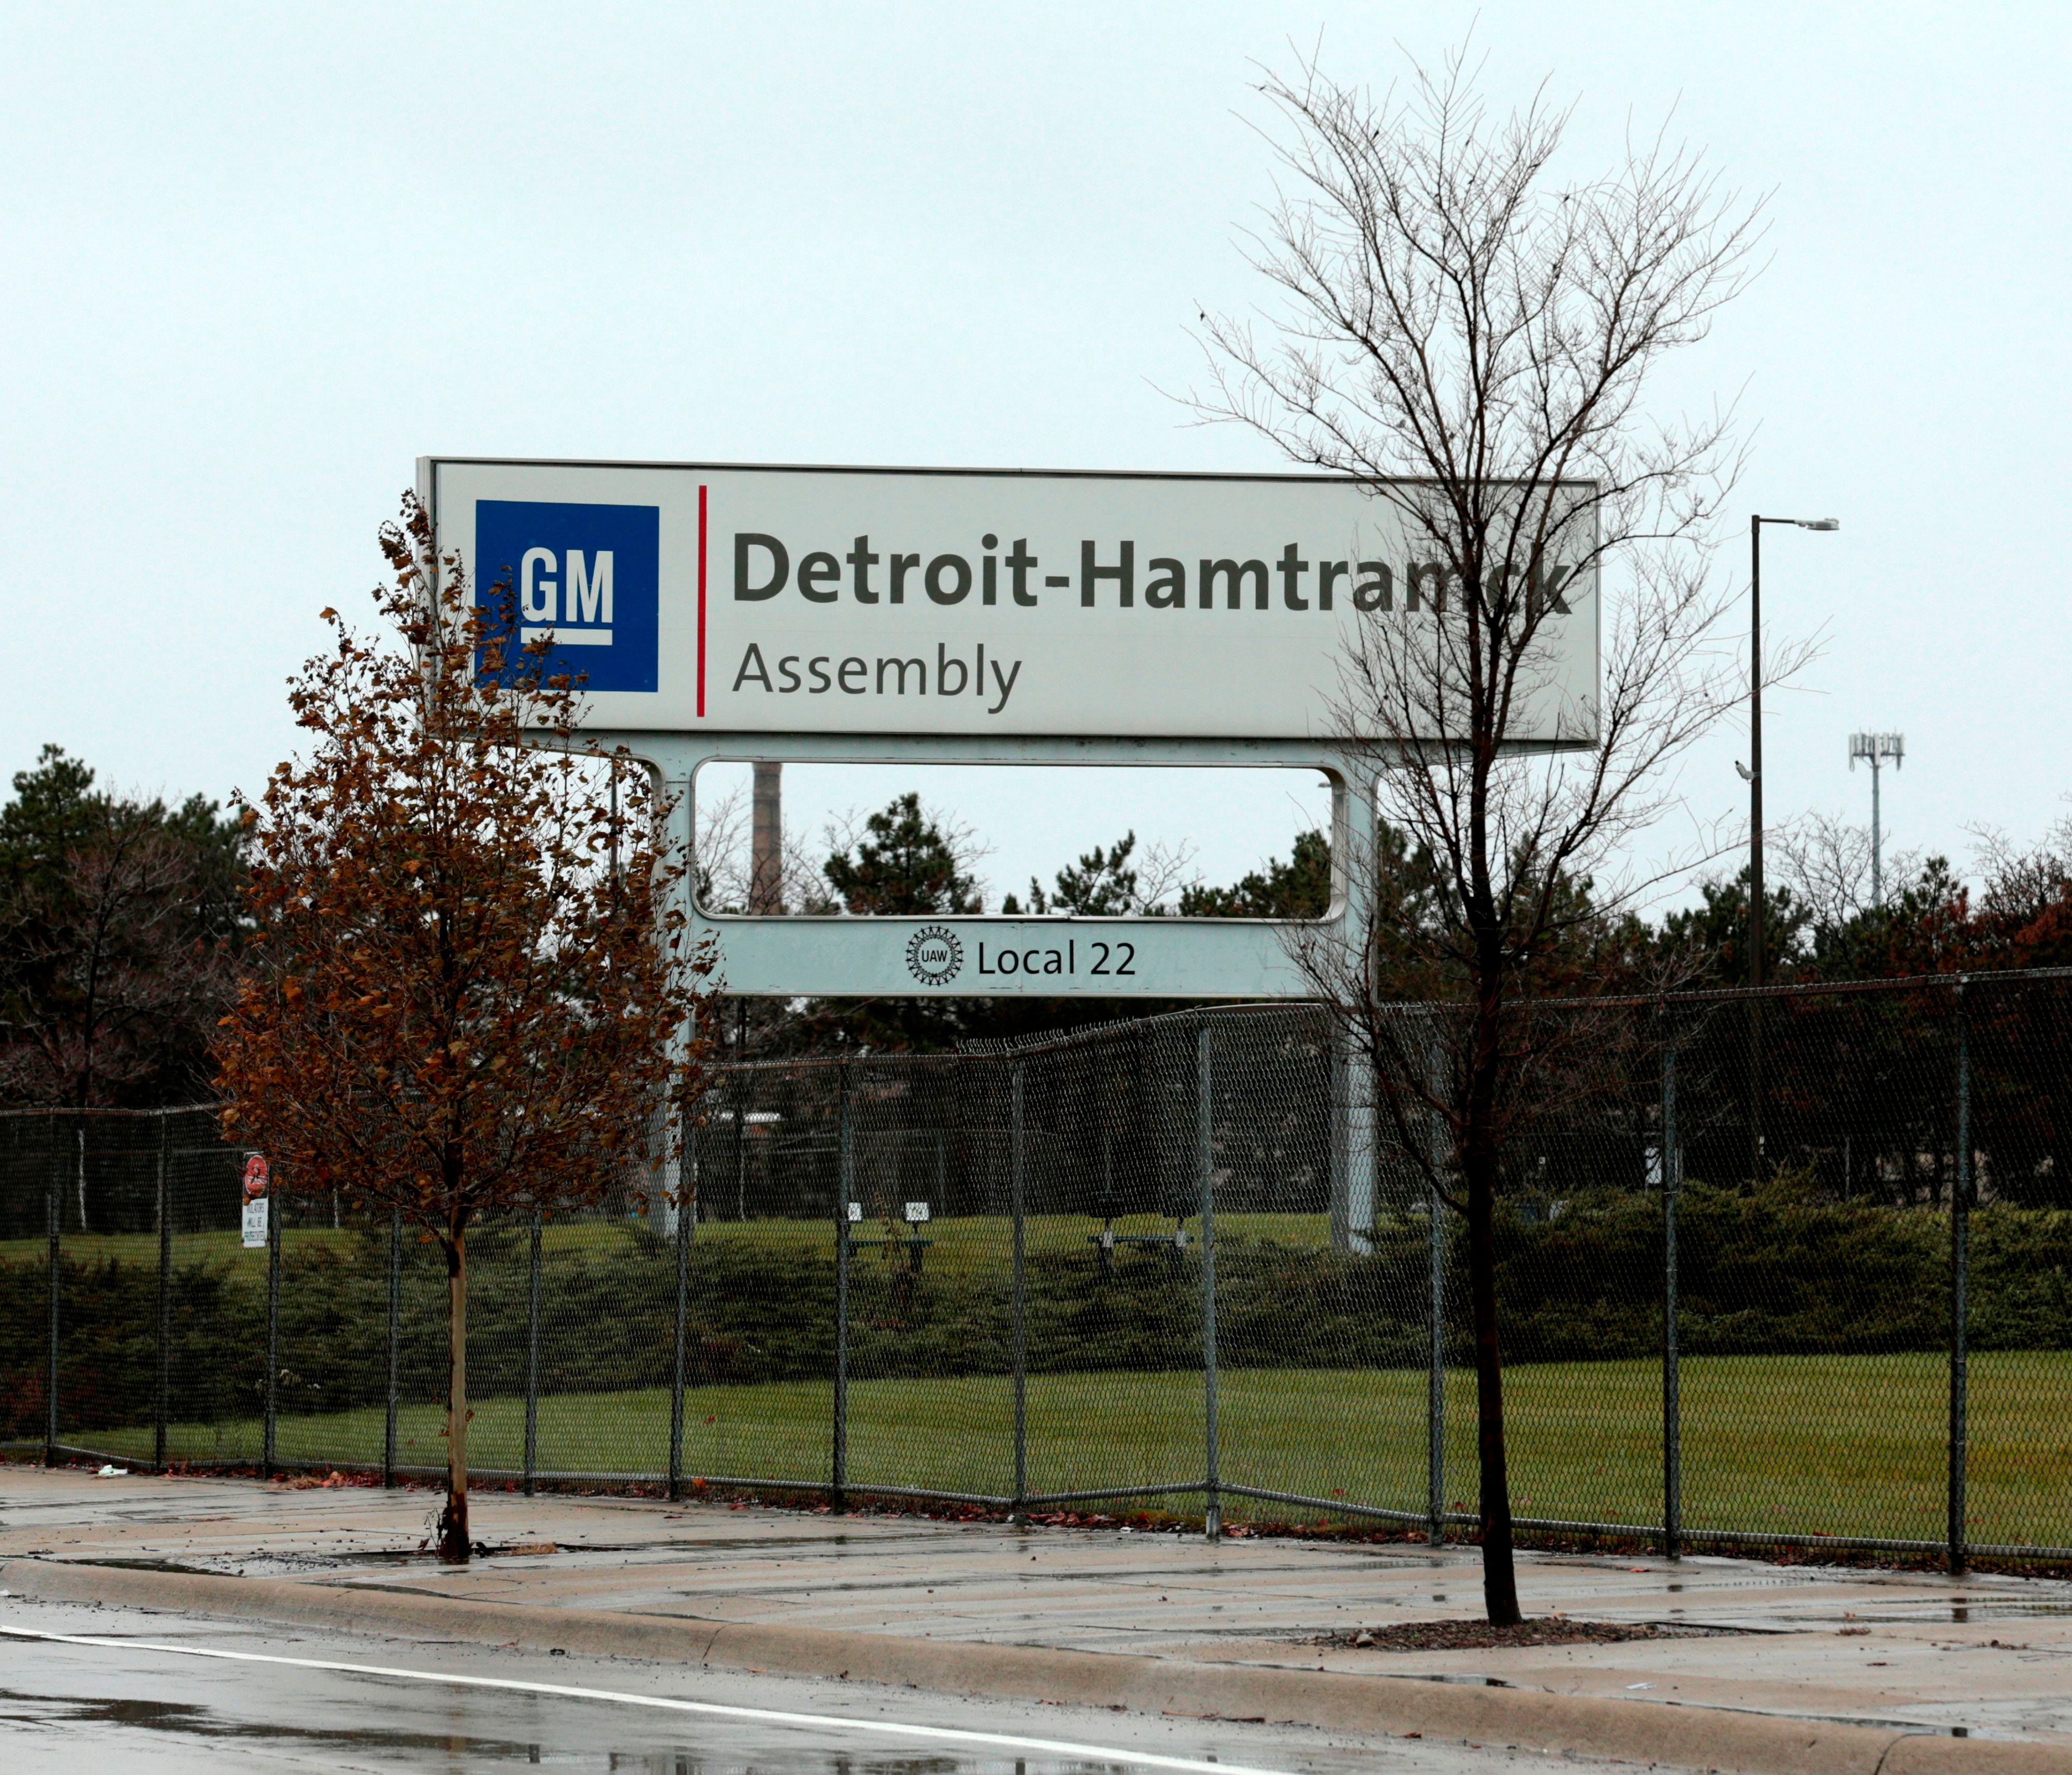 The closure of the Detroit-Hamtramck plant, which straddles both cities, marks the final semblance of an automotive plant in Hamtramck after American Axle & Manufacturing closed in 2012. The GM factory employs 1,348 hourly and 194 salaried workers.